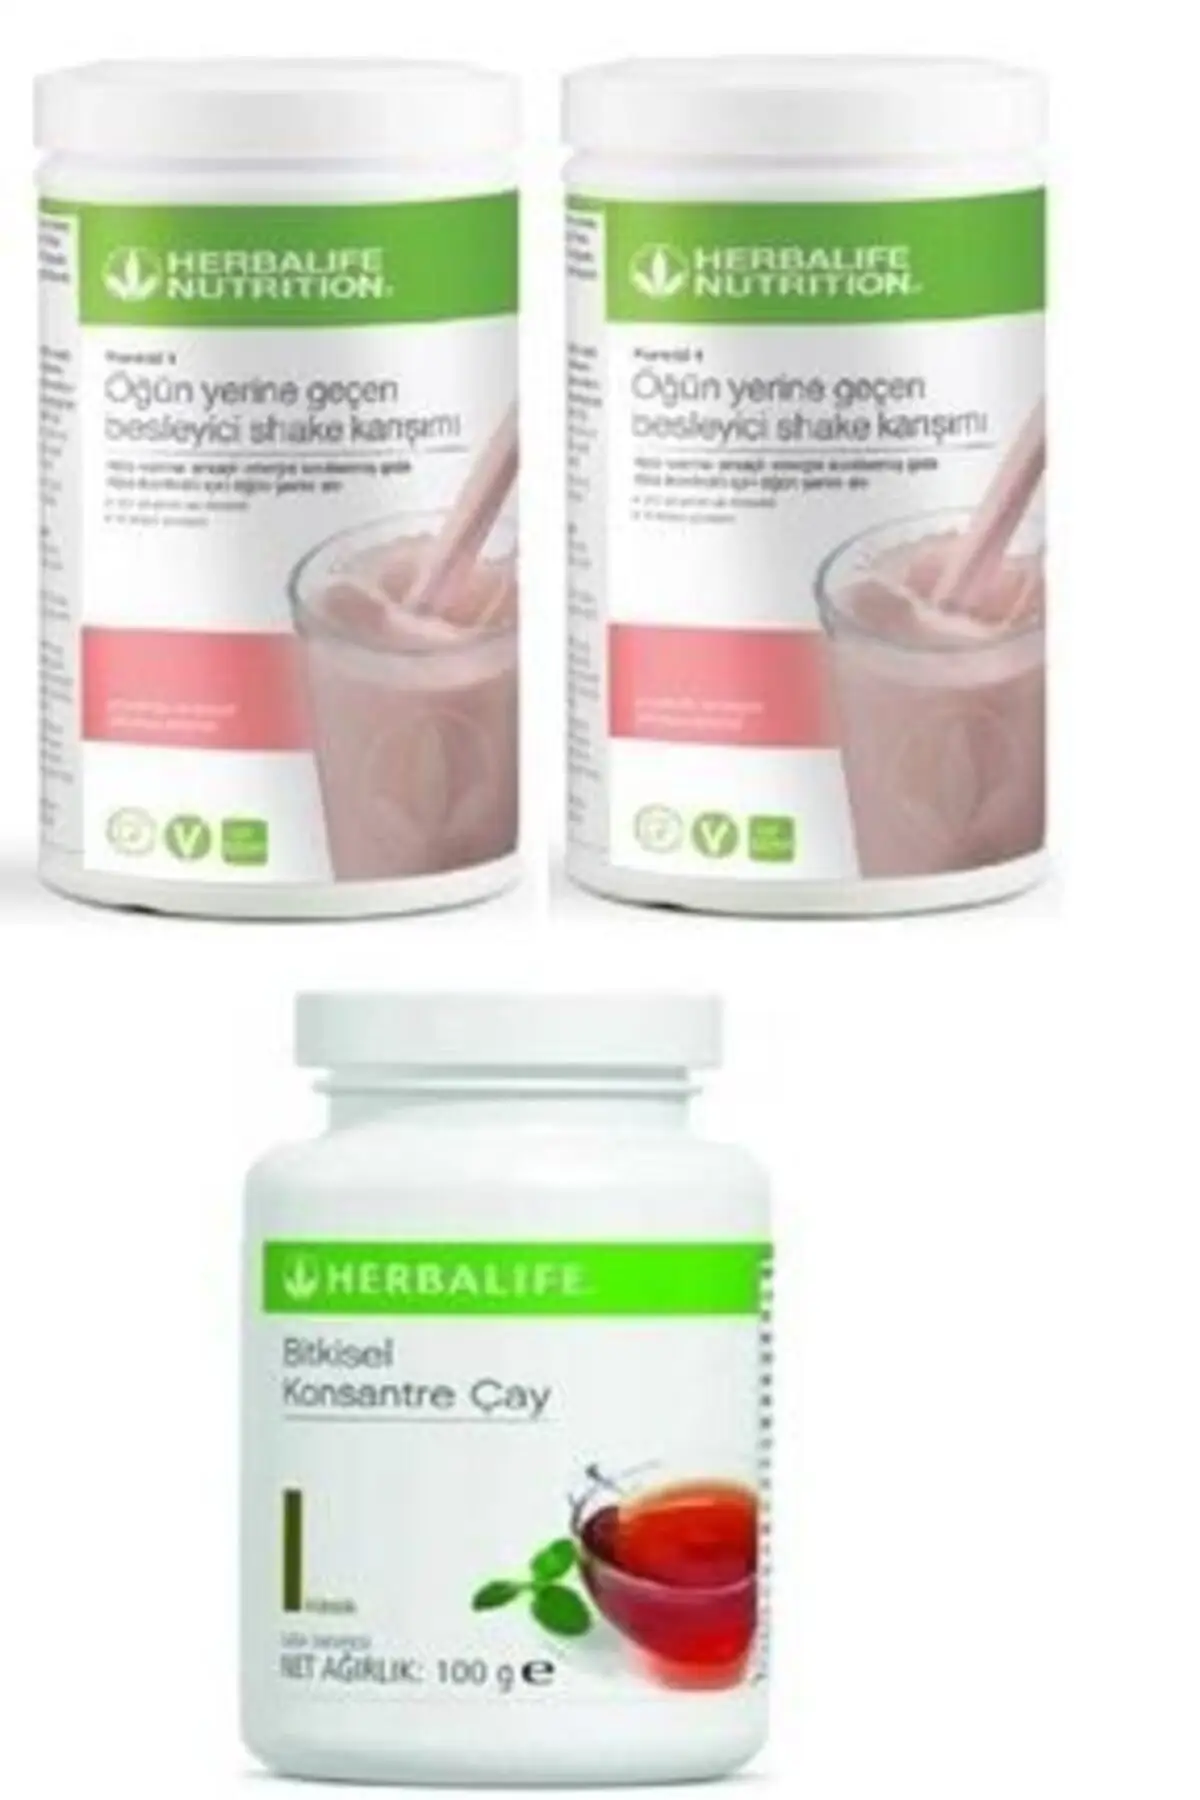 

Formula 1 Last Meals Instead Of Nutritious Shake Mix Raspberry + Bitkisel Concentrated Tea Classic